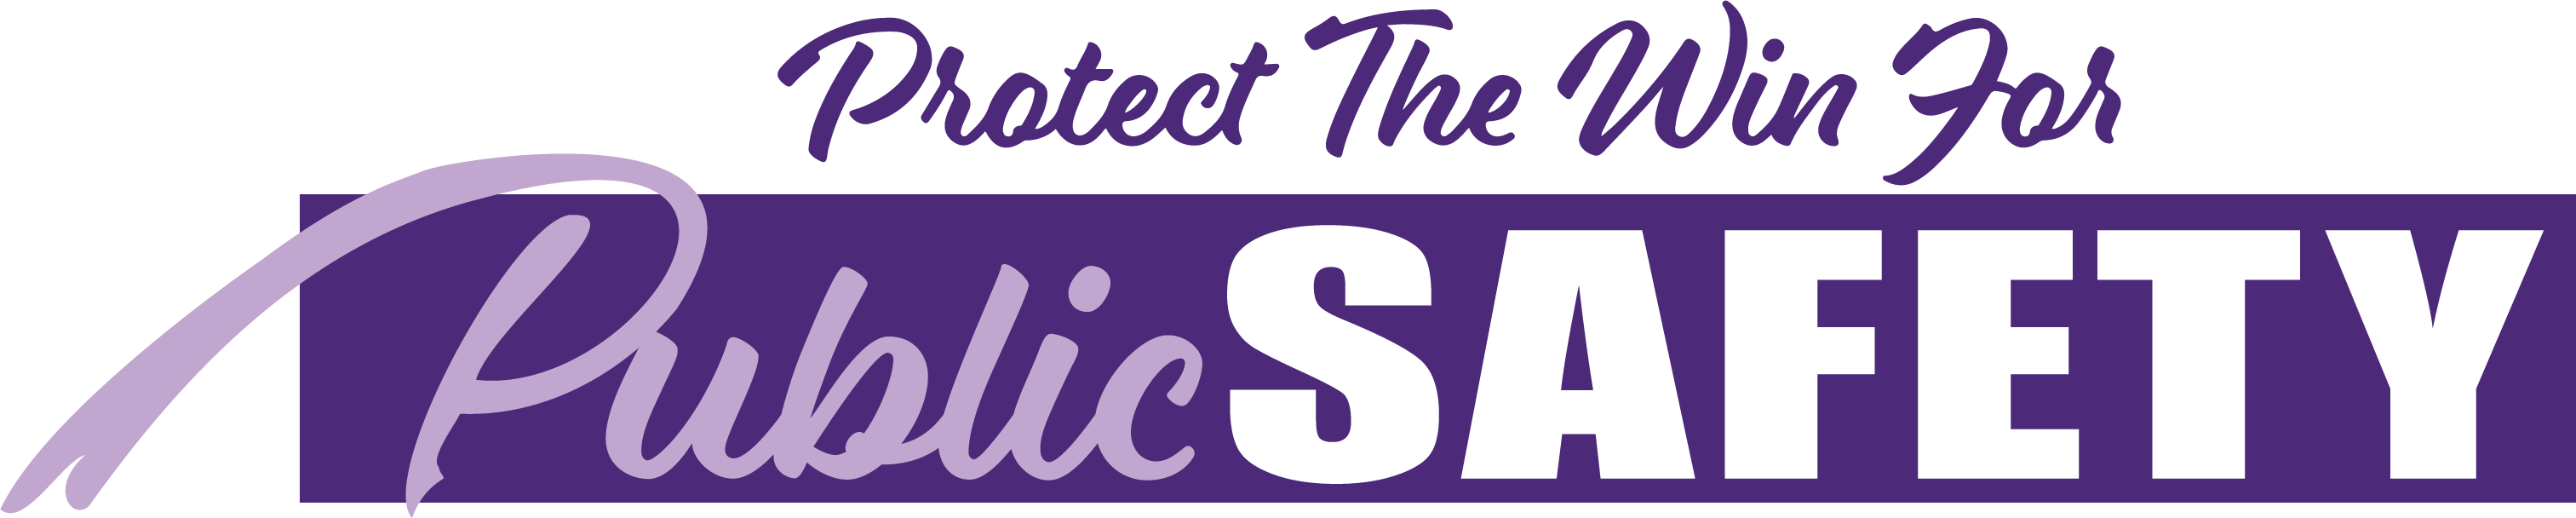 Protect the Win for Public Safety, Oppose the Recall of DA Price (Price Ballot Measure Committee)